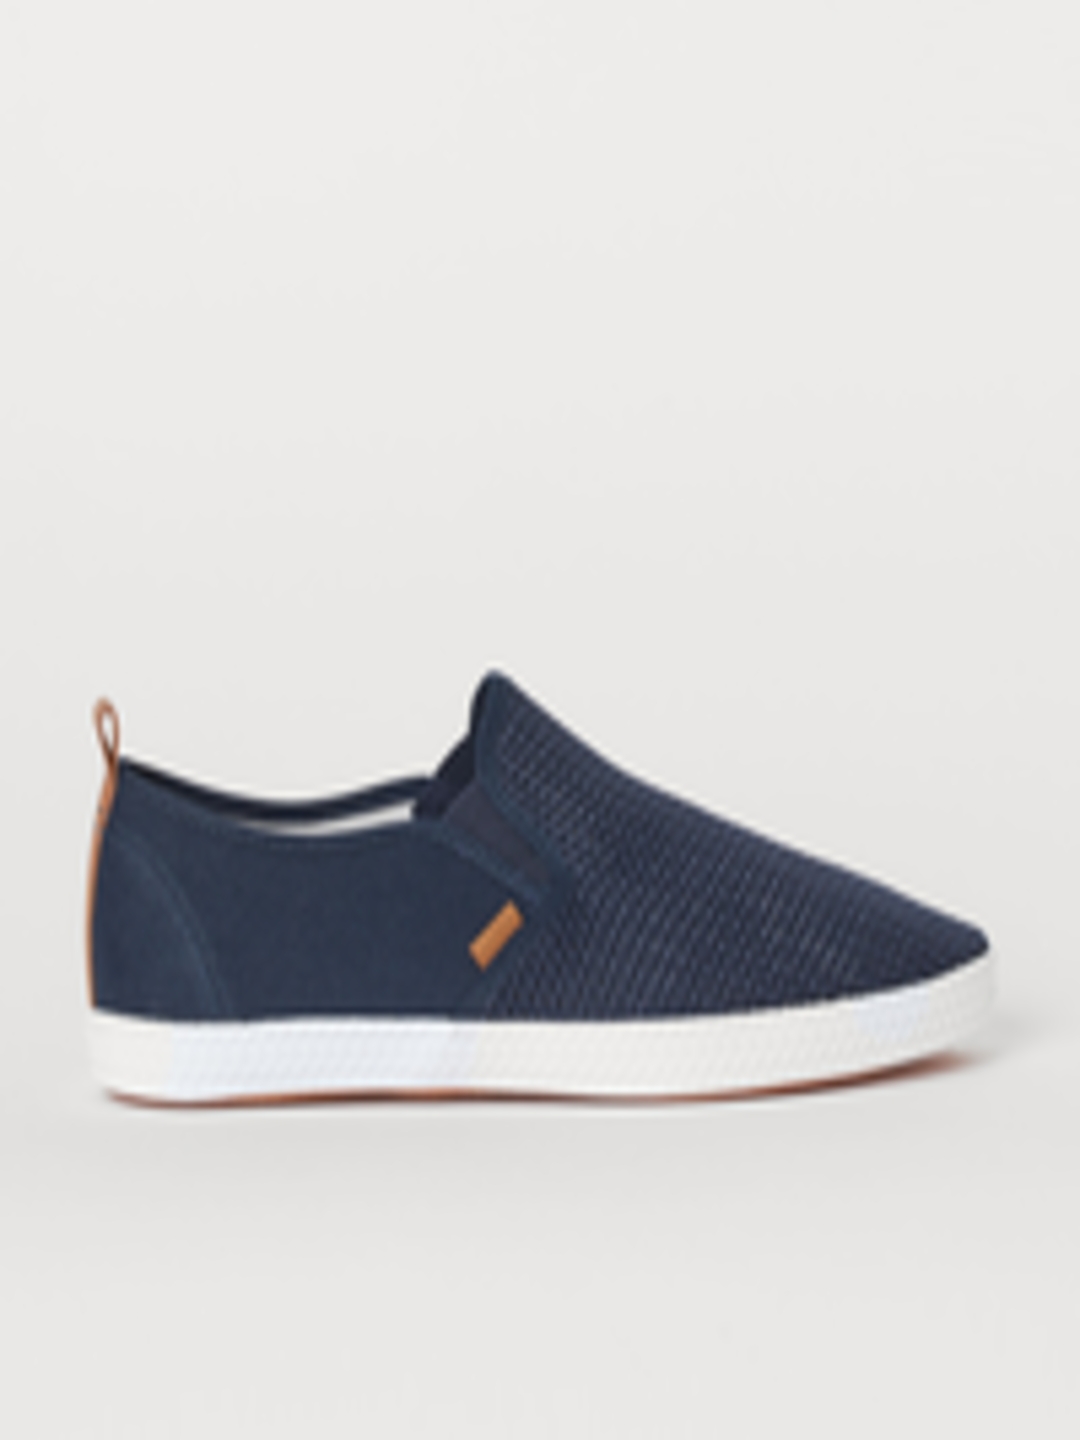 Buy H&M Men Blue Slip On Trainers - Casual Shoes for Men 10435554 | Myntra